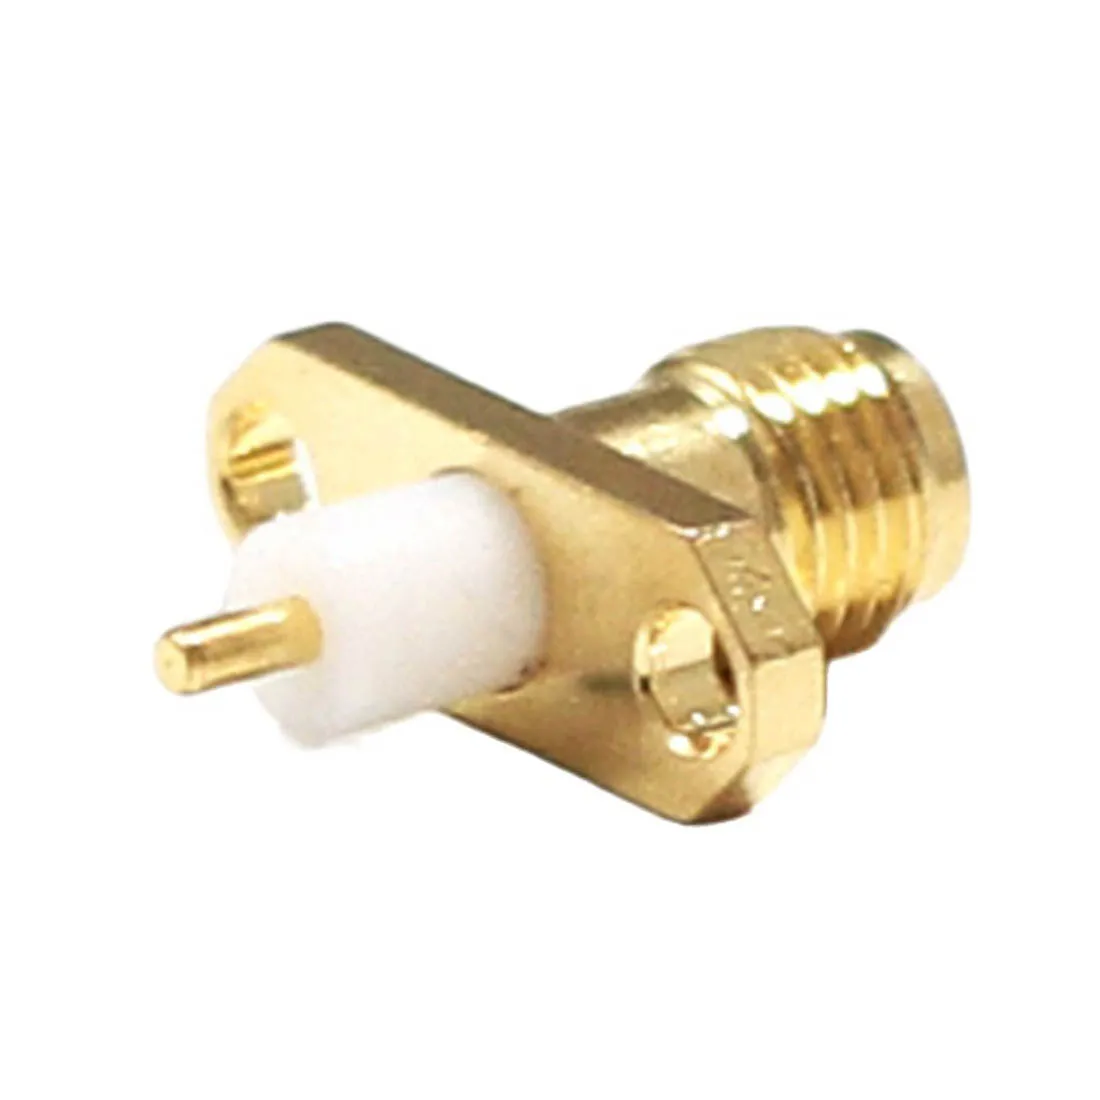 1pc NEW  SMA Female Jack RF Coax Modem Convertor Connector Panel Mount Solder Post Straight Insulator Long 4mm Goldplated 5 5 mm x 2 1mm dc power jack socket female panel mount connector metal 5 5 2 1 dc099